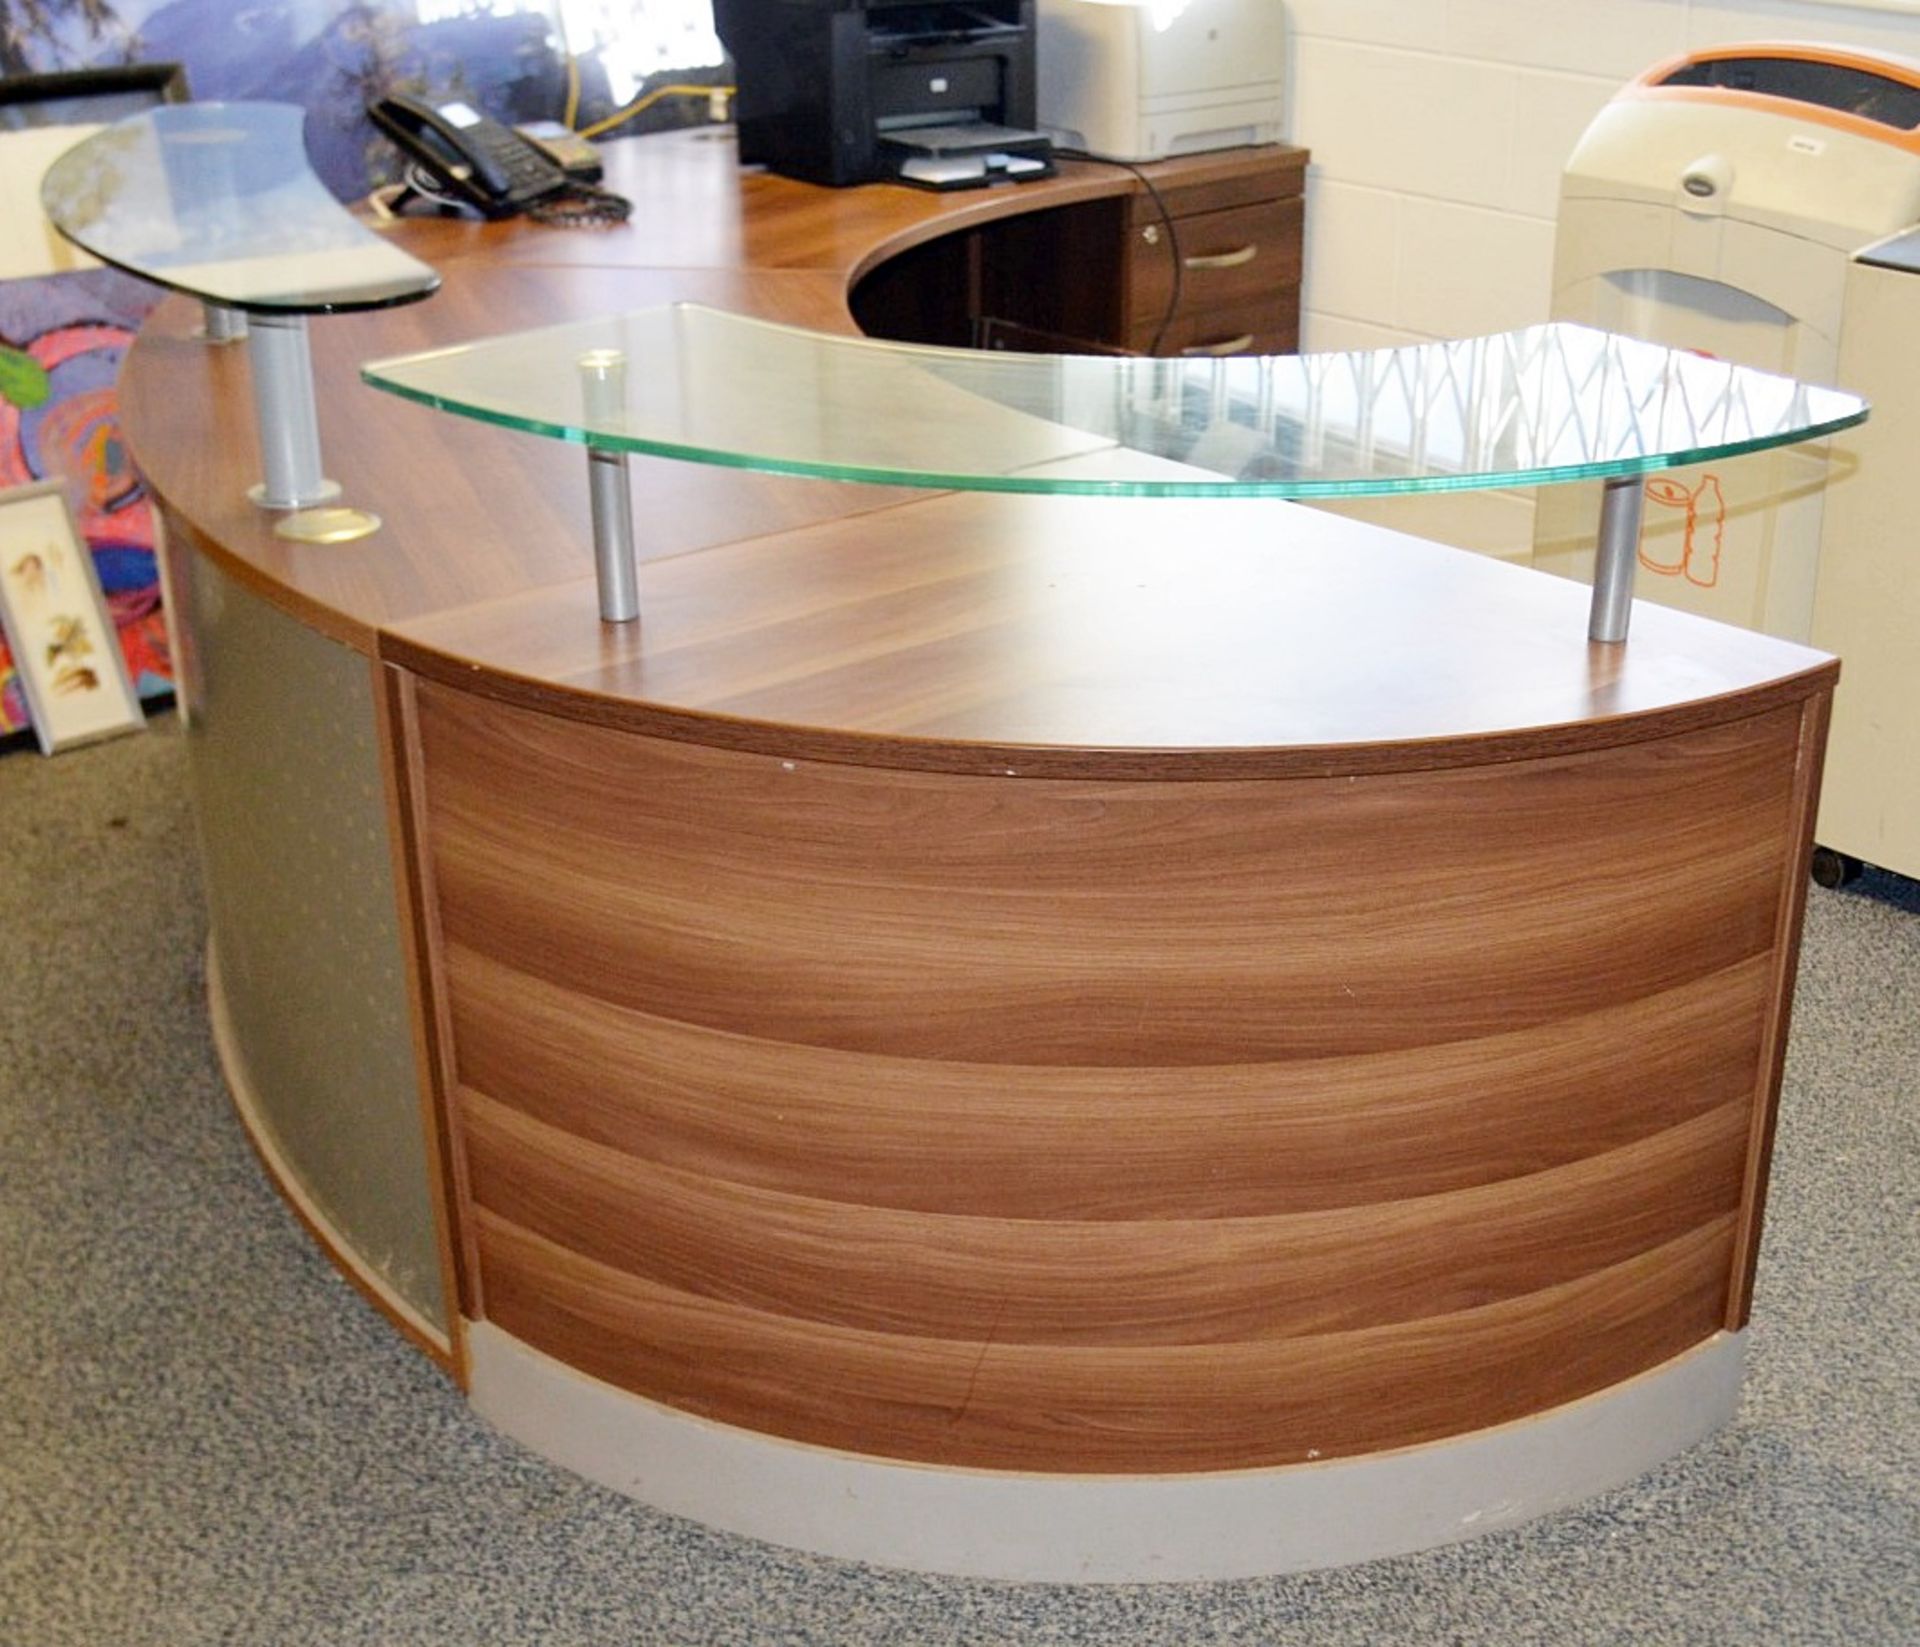 1 x Curved 3-Metre Wide Executive Reception Desk - Recently Removed From A Working Office - Image 3 of 12